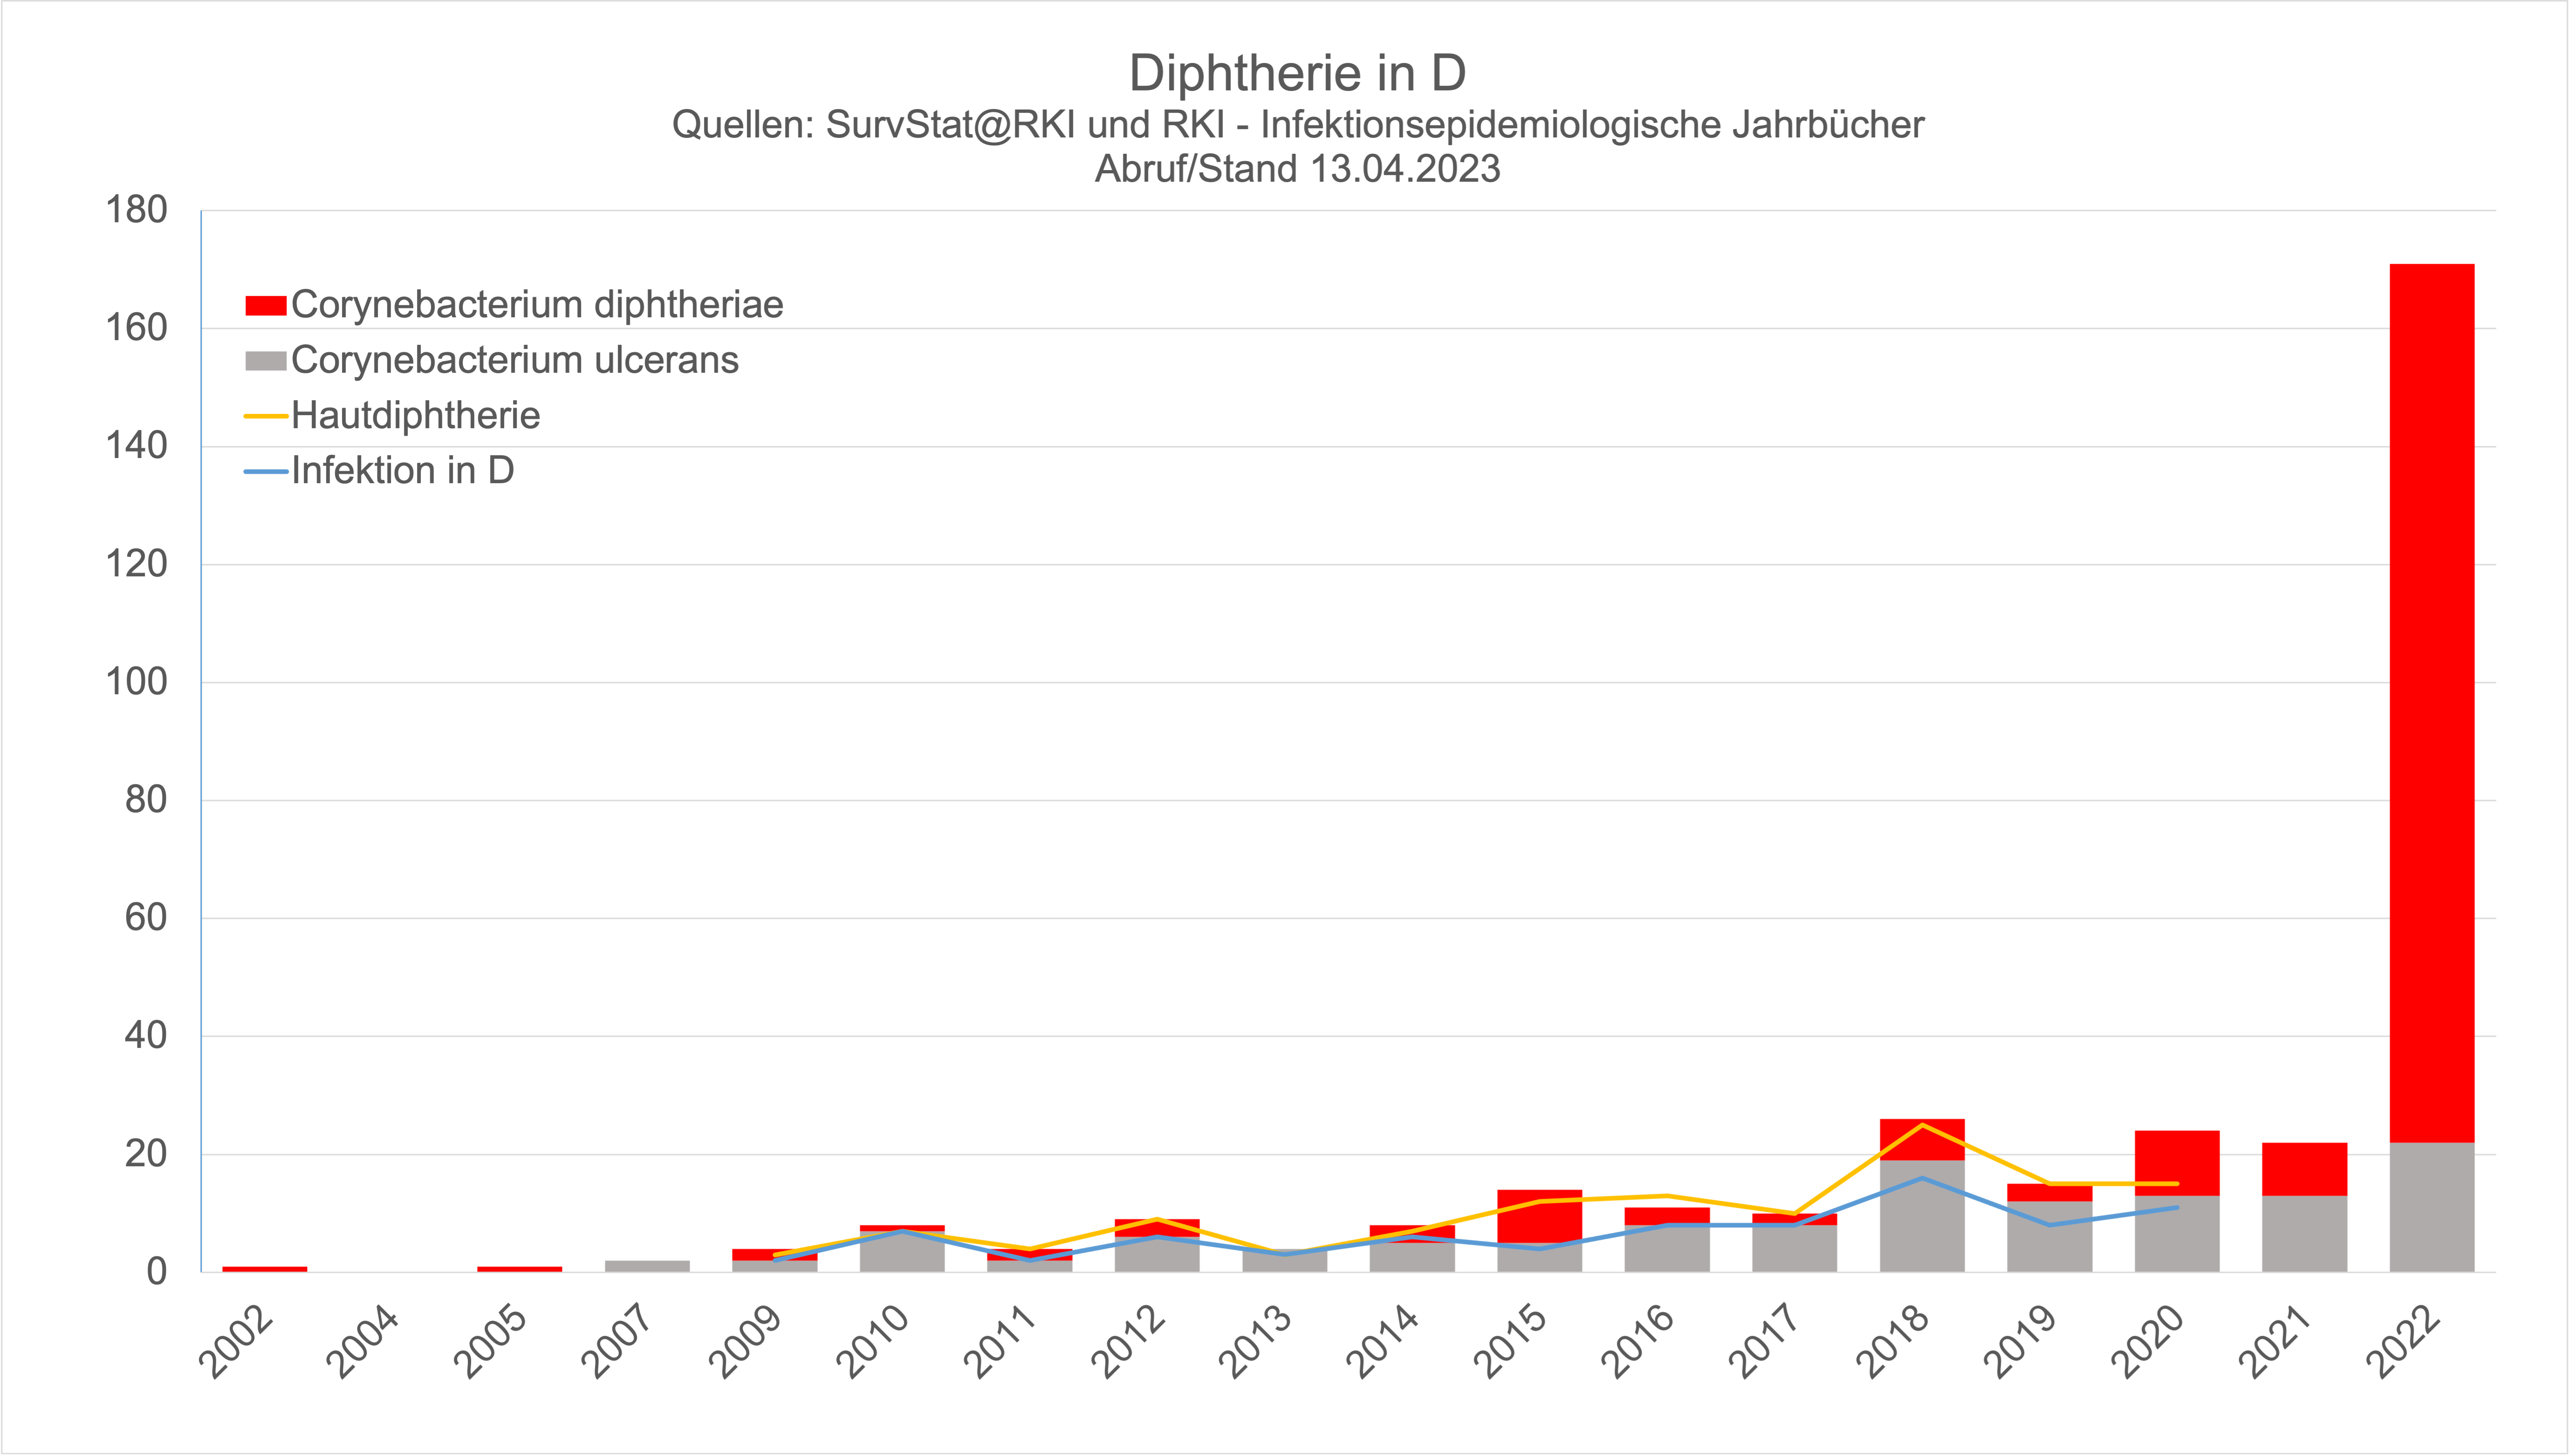 Diphtherie D ab 2009